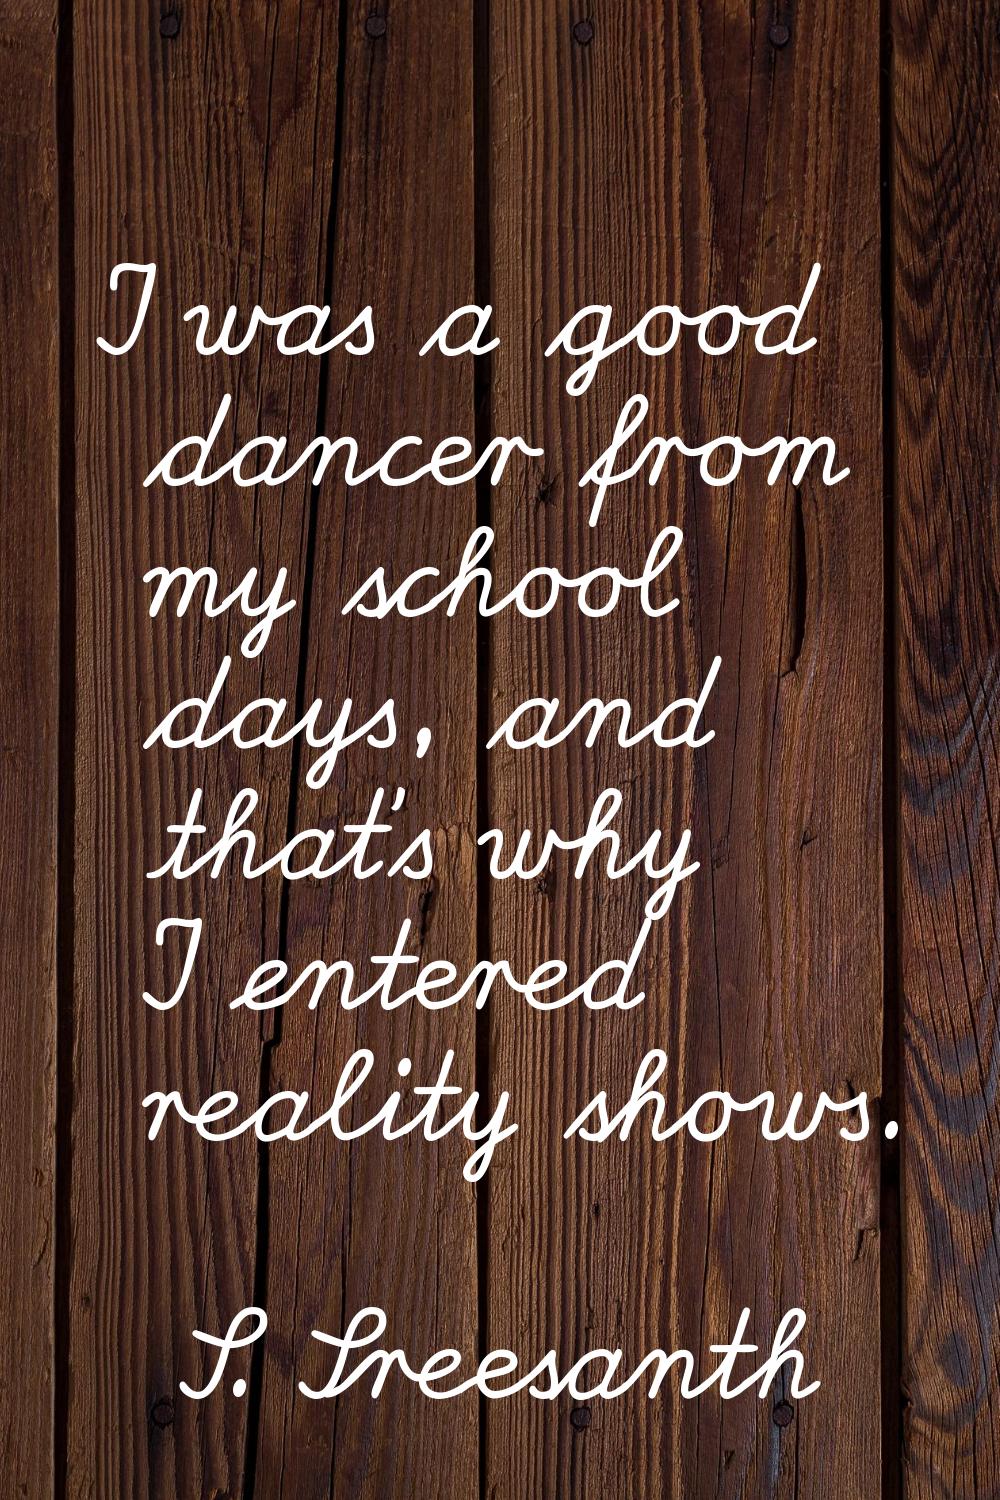 I was a good dancer from my school days, and that's why I entered reality shows.